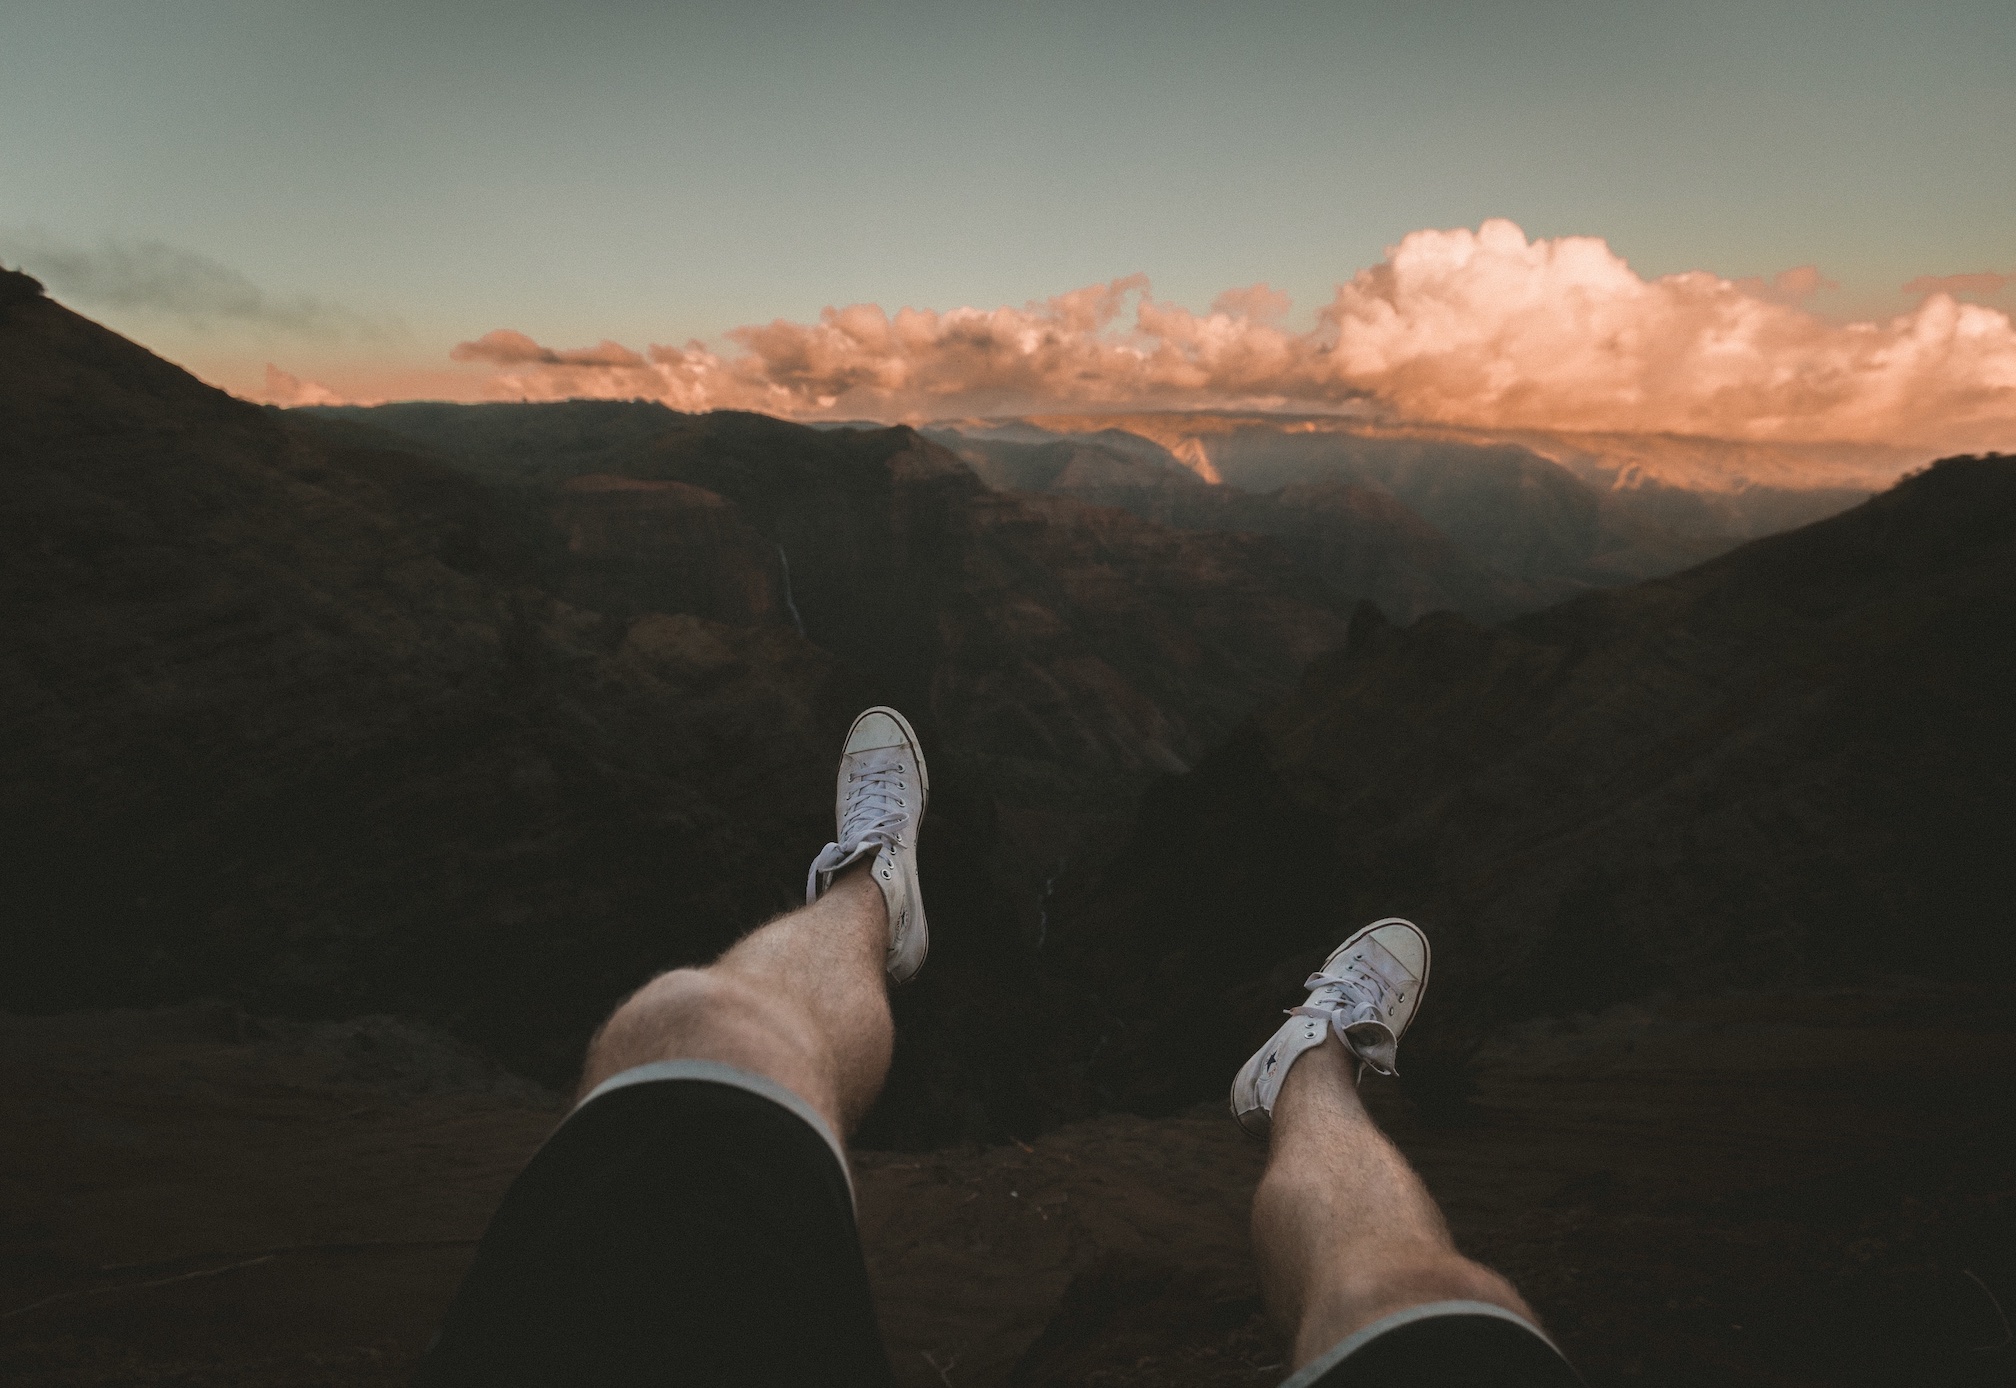 Man dangling legs over the edge of a canyon; image by Jakob Owens, via Unsplash.com.